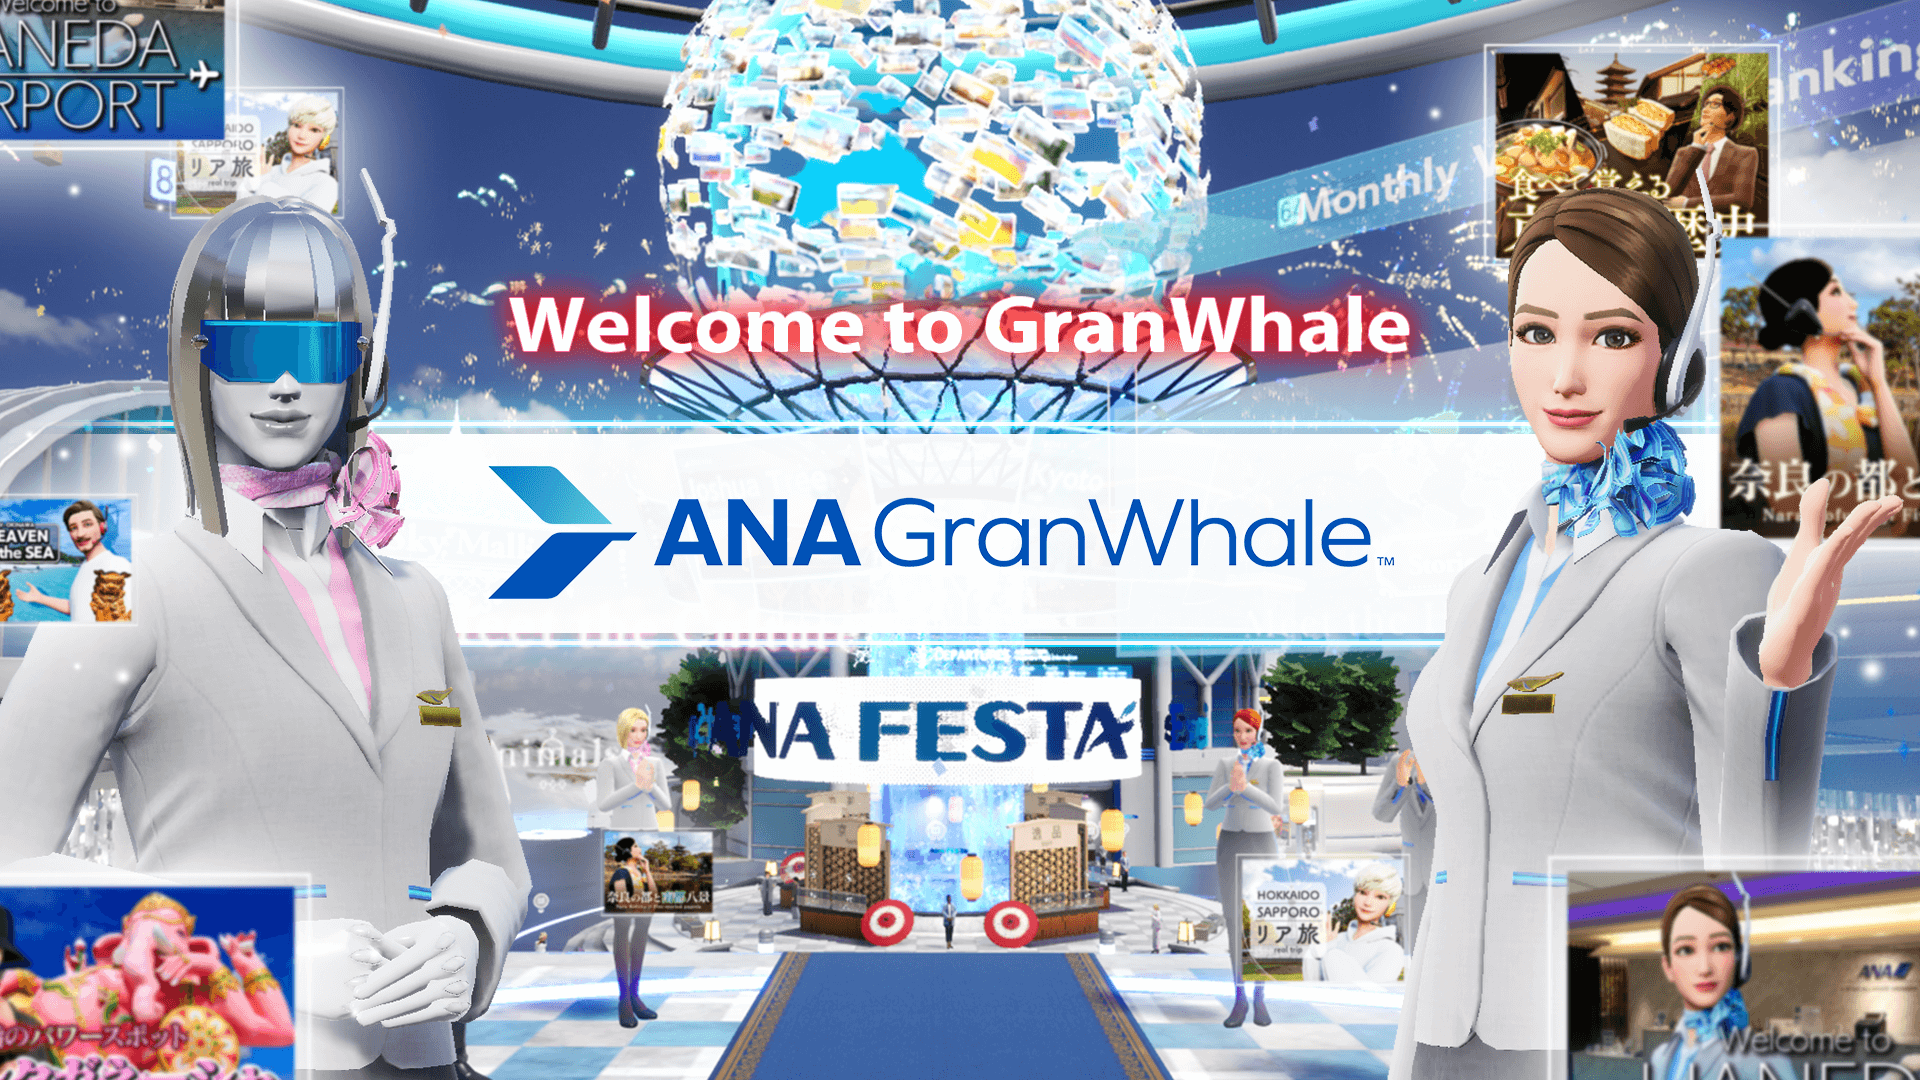 Embark on Virtual Travel, Earn Miles with the ANA GranWhale App, Launching Today